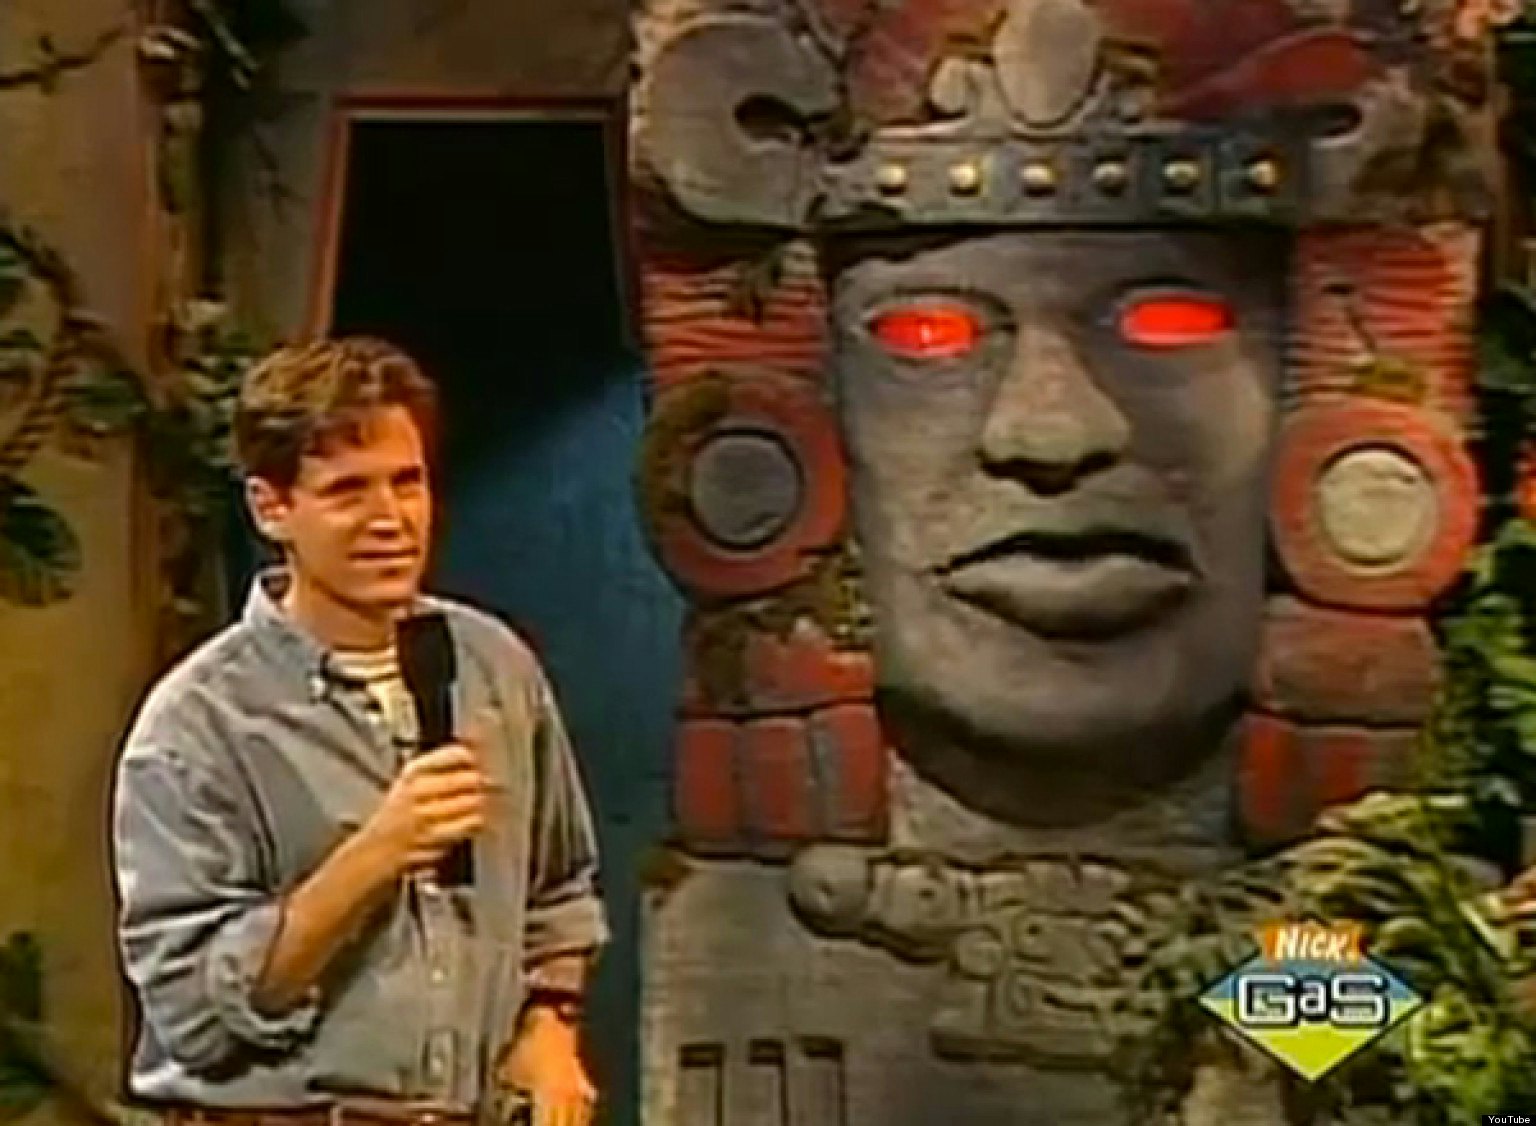 legends of the hidden temple season 2 dailymotion